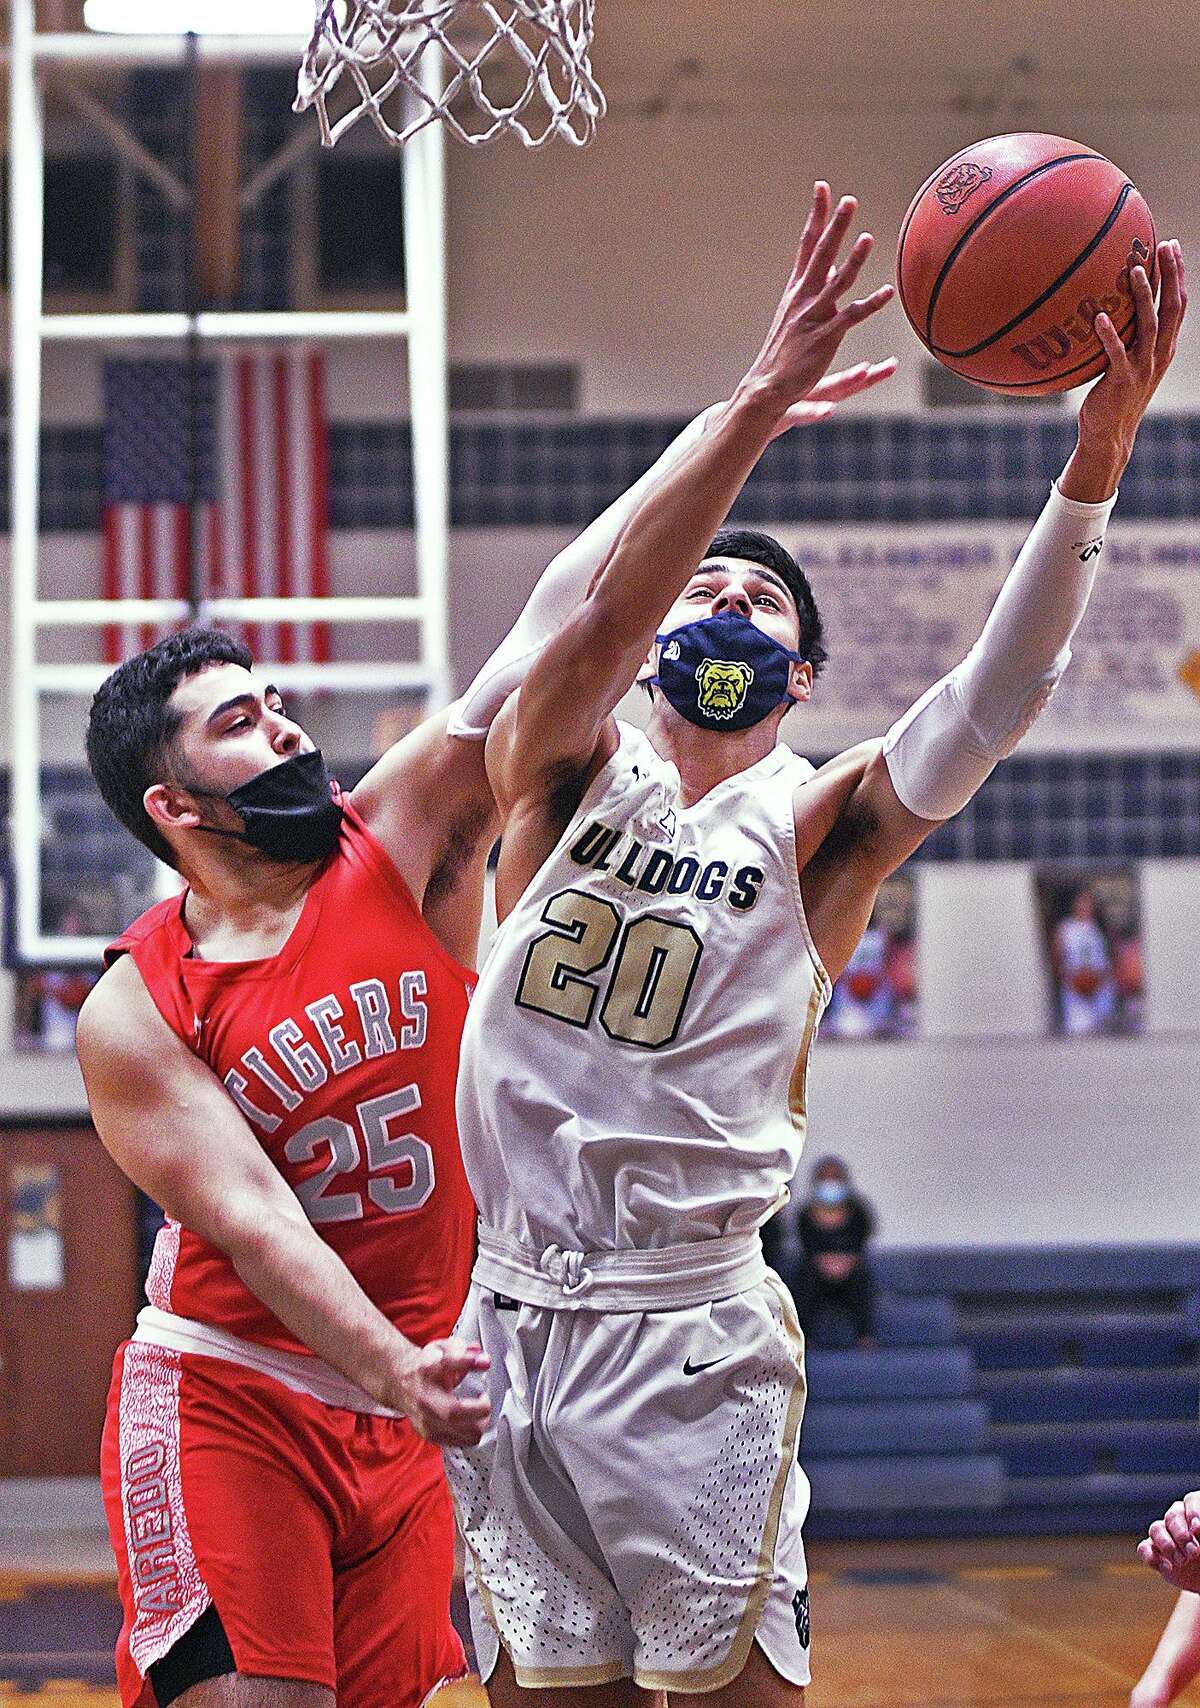 Jacob Rodriguez and the Bulldogs defeated the Tigers 88-62 Wednesday.